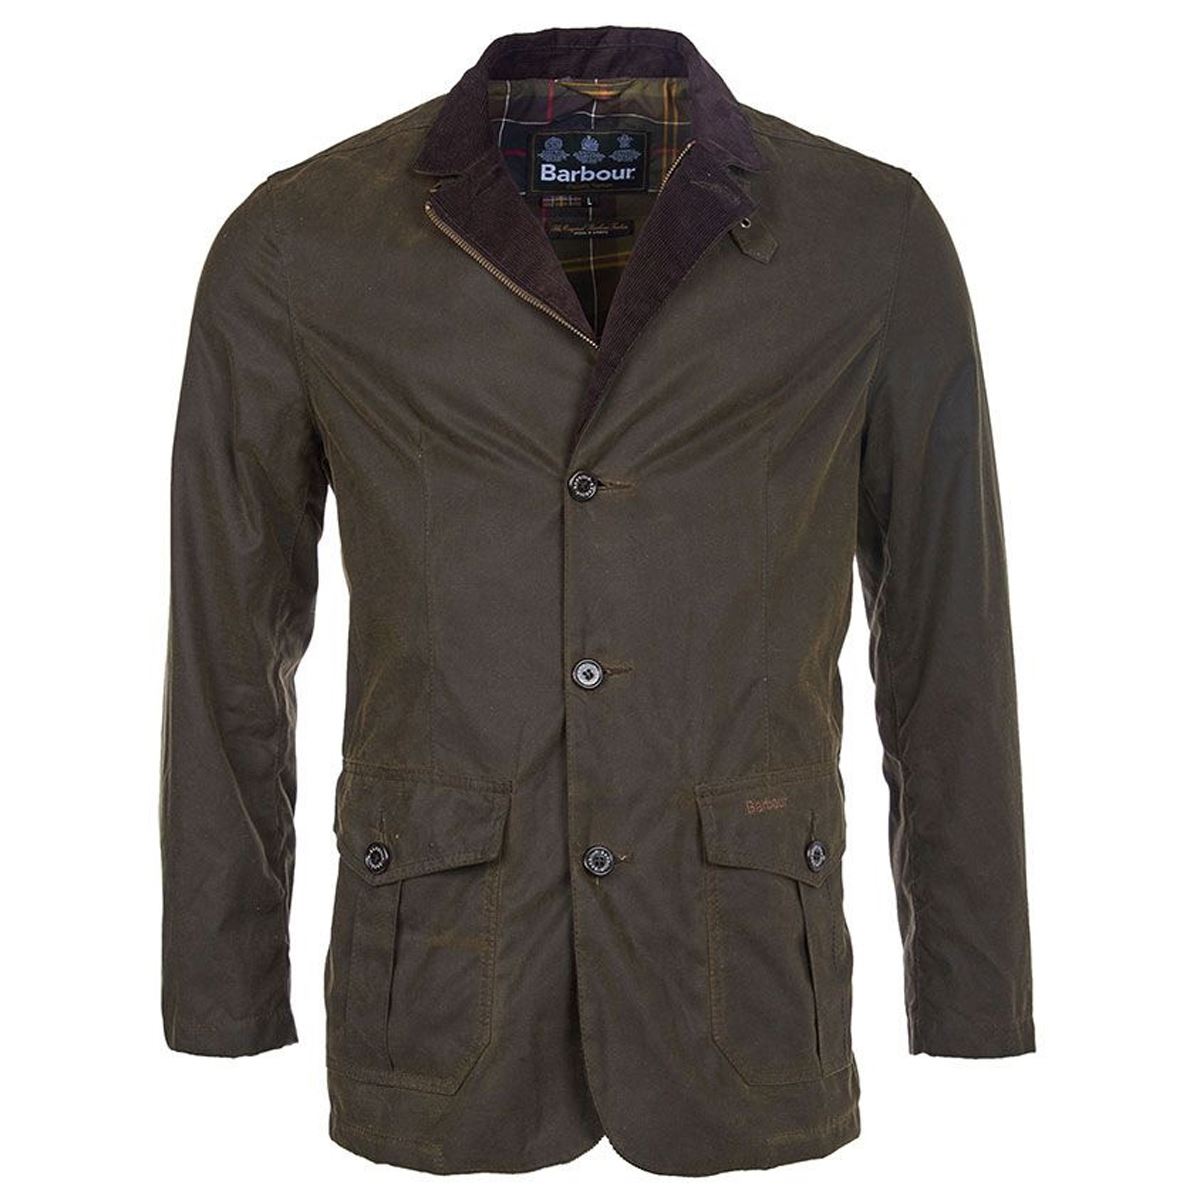 Is re-waxing the Barbour Lutz Jacket complex?